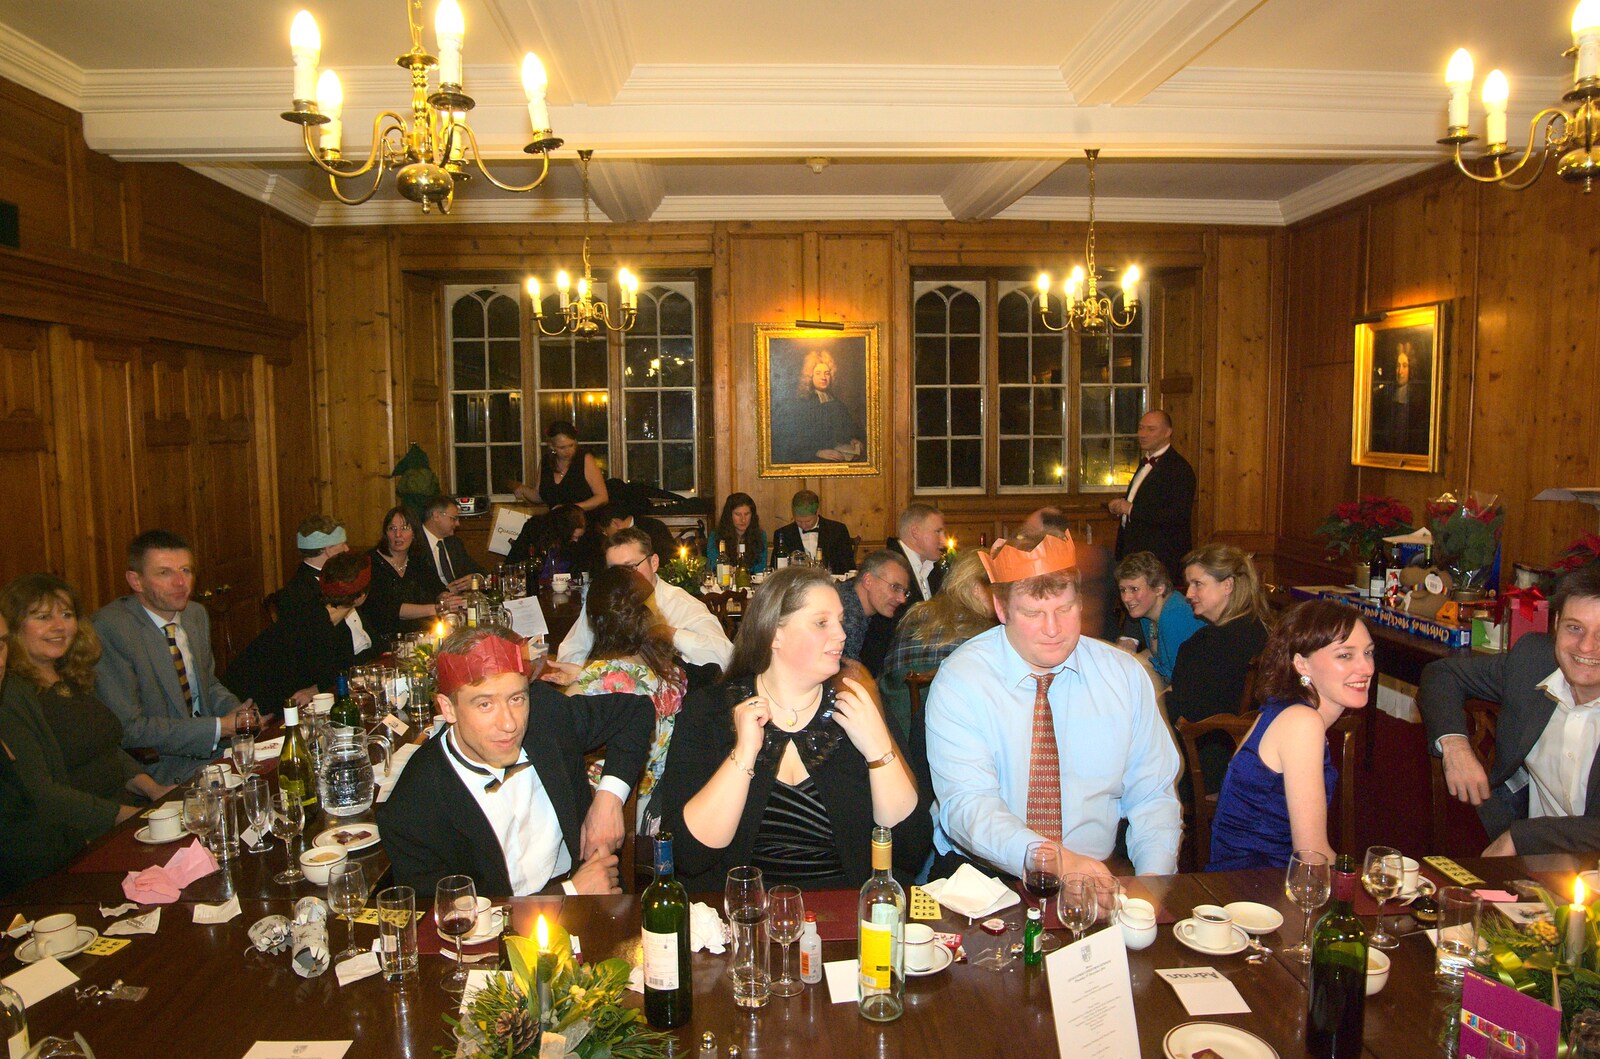 The room from A Qualcomm Christmas, Christ's College, Cambridge - 8th December 2011